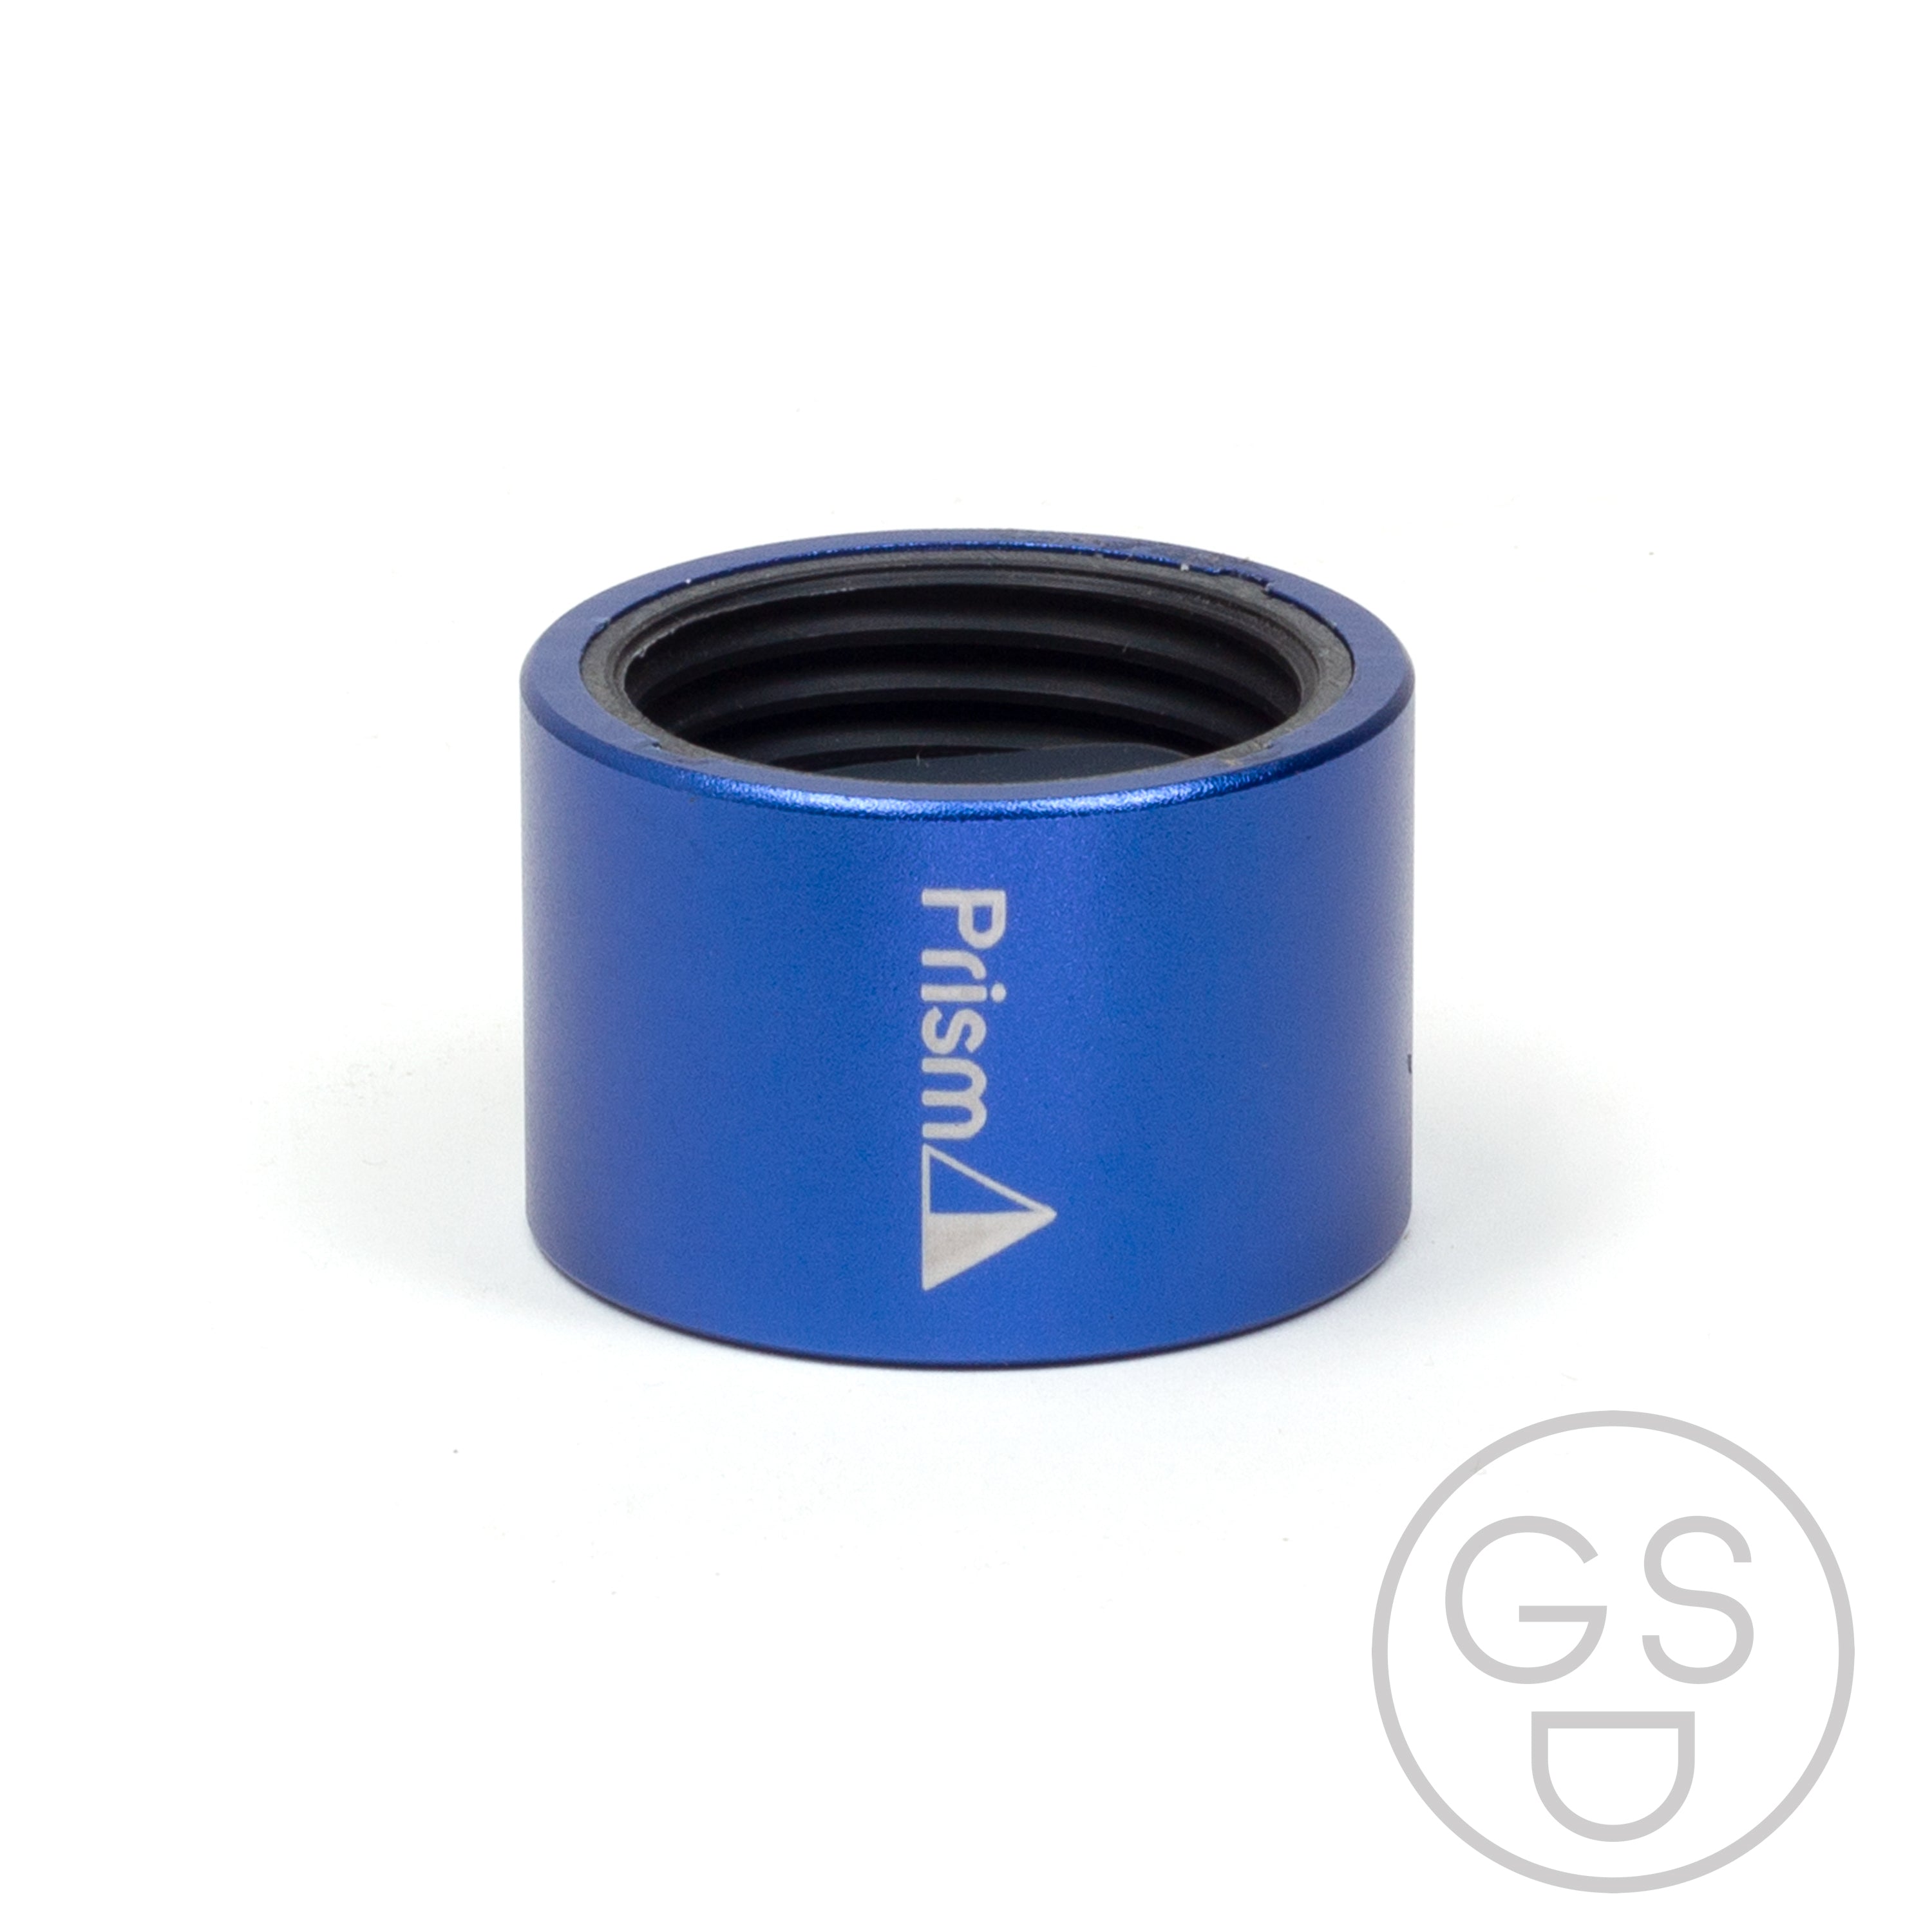 Prism Modular Waterpipe Halo Connector - Blue